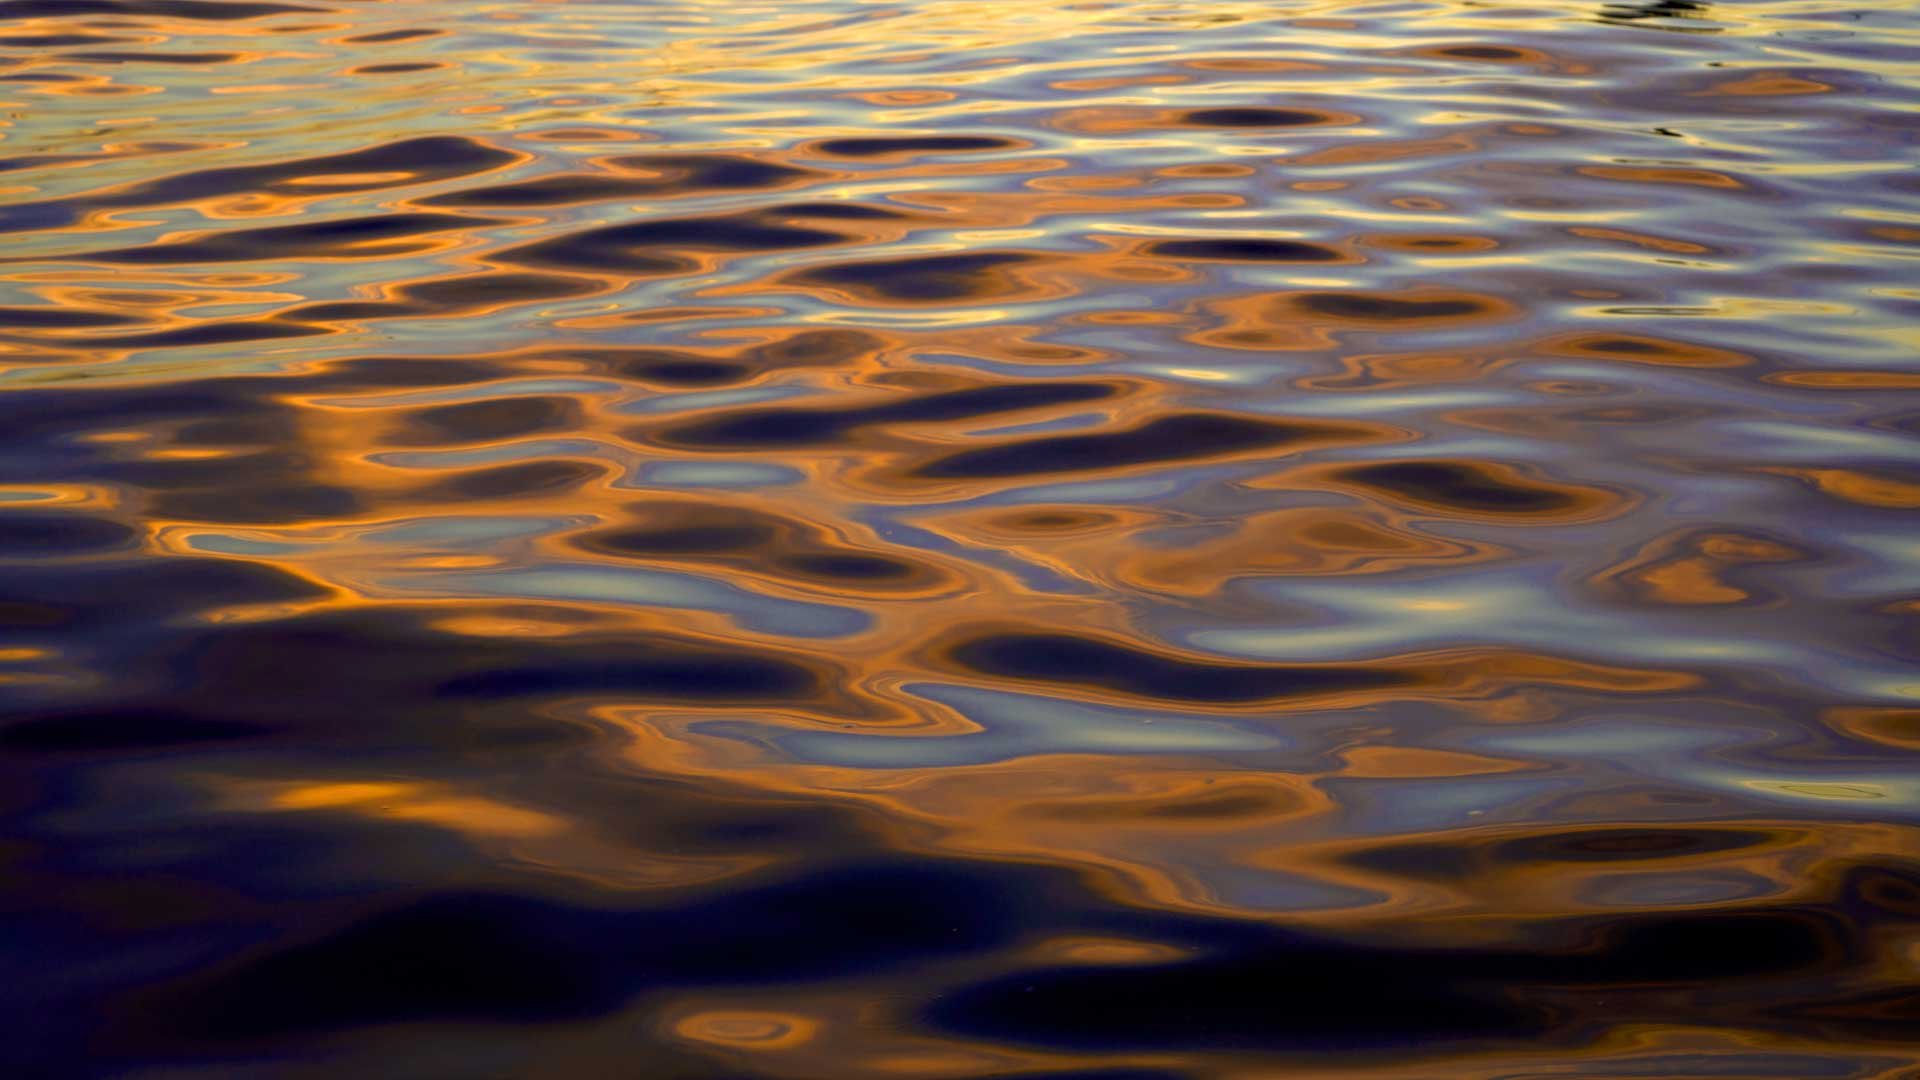 Colours of sunset reflected on a close up view of rippled water.